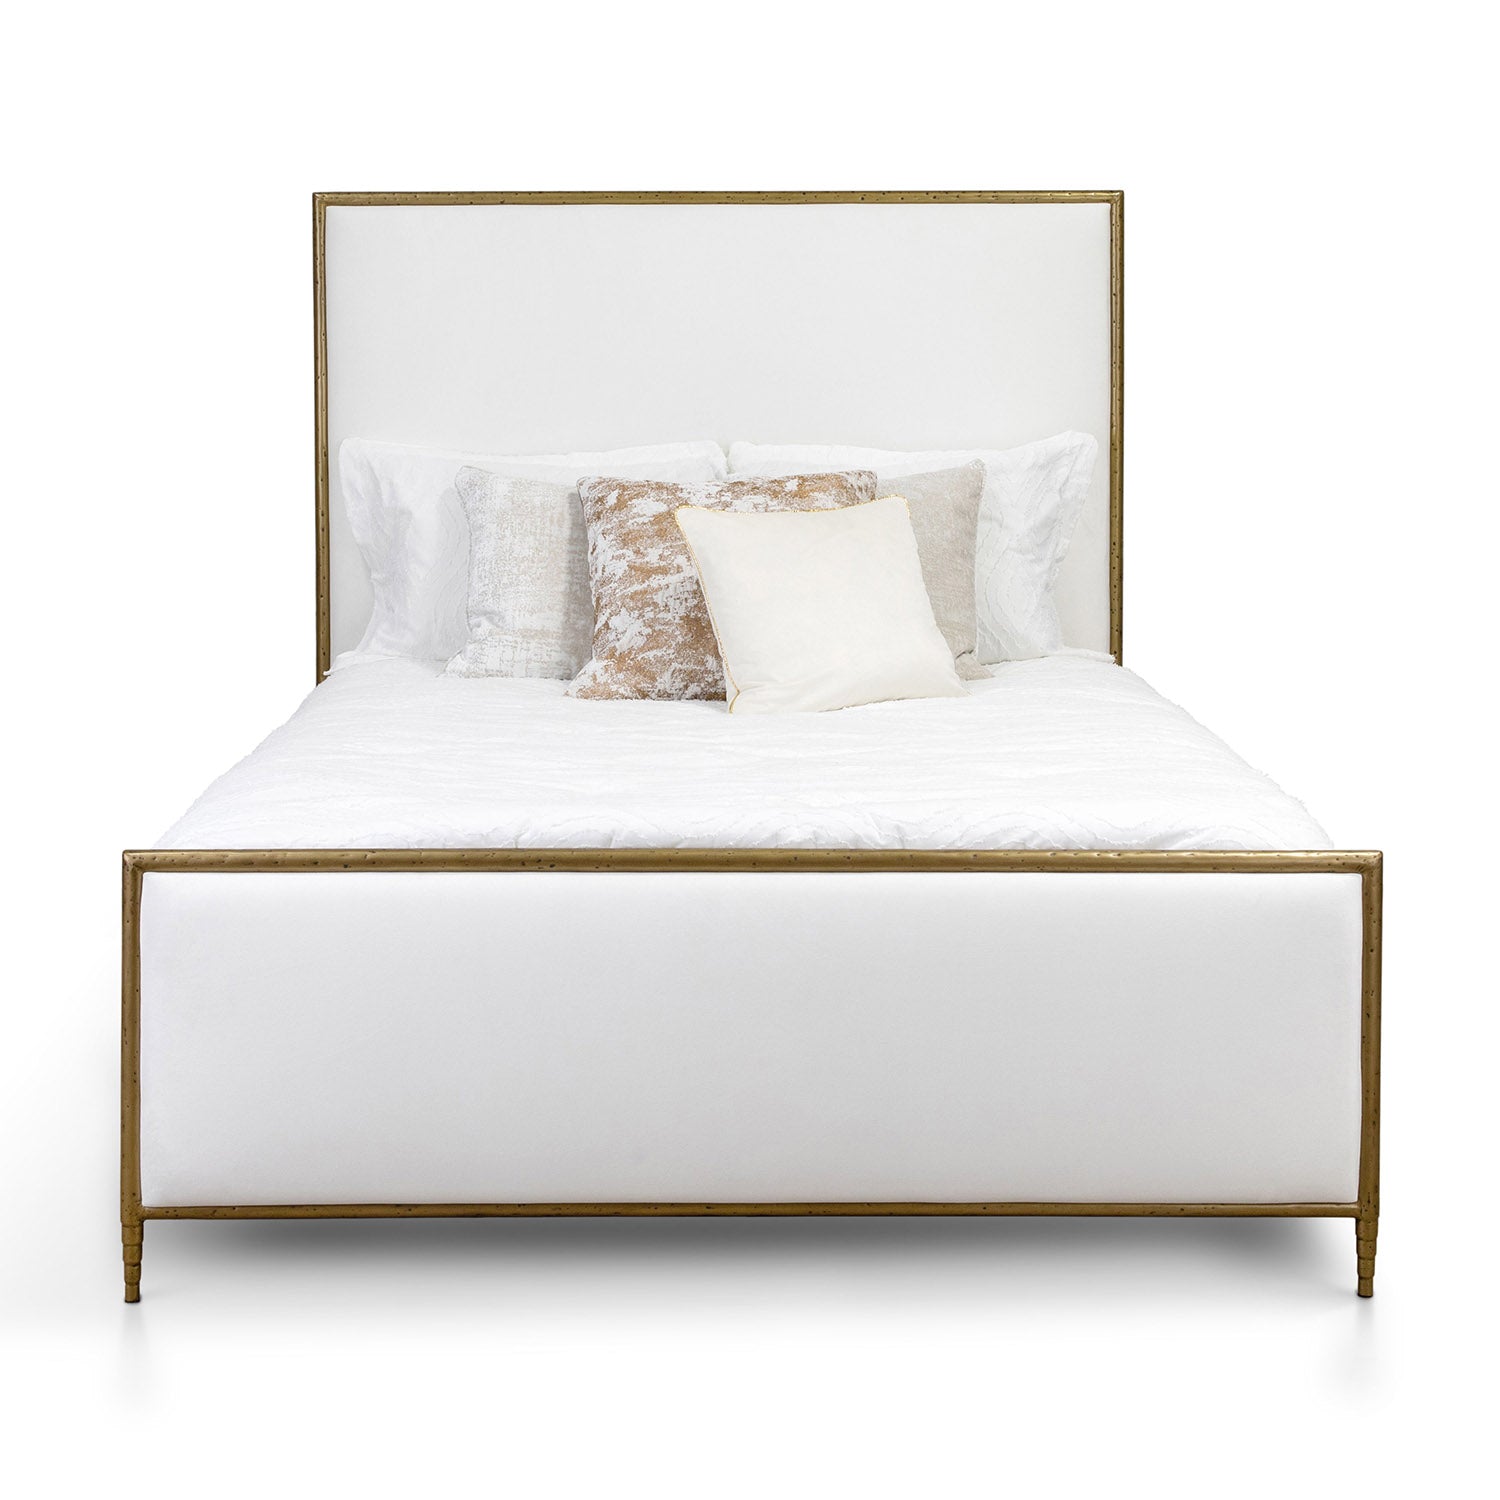 Wesley Allen Royce Complete Bed with High Foot Board in Royal White and Hammered Brass Finish.